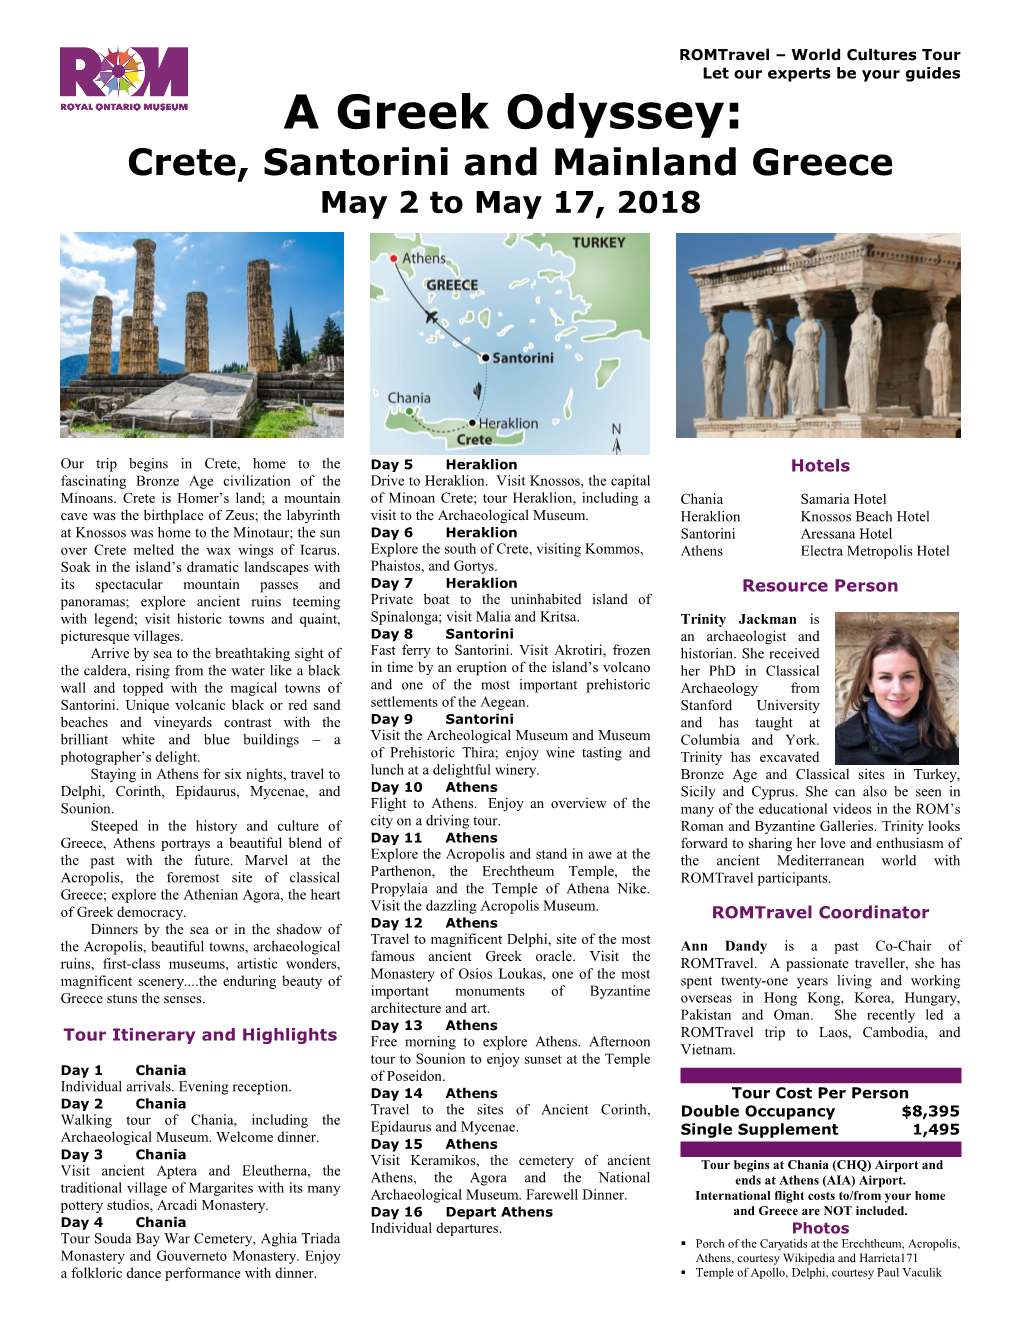 A Greek Odyssey: Crete, Santorini and Mainland Greece May 2 to May 17, 2018